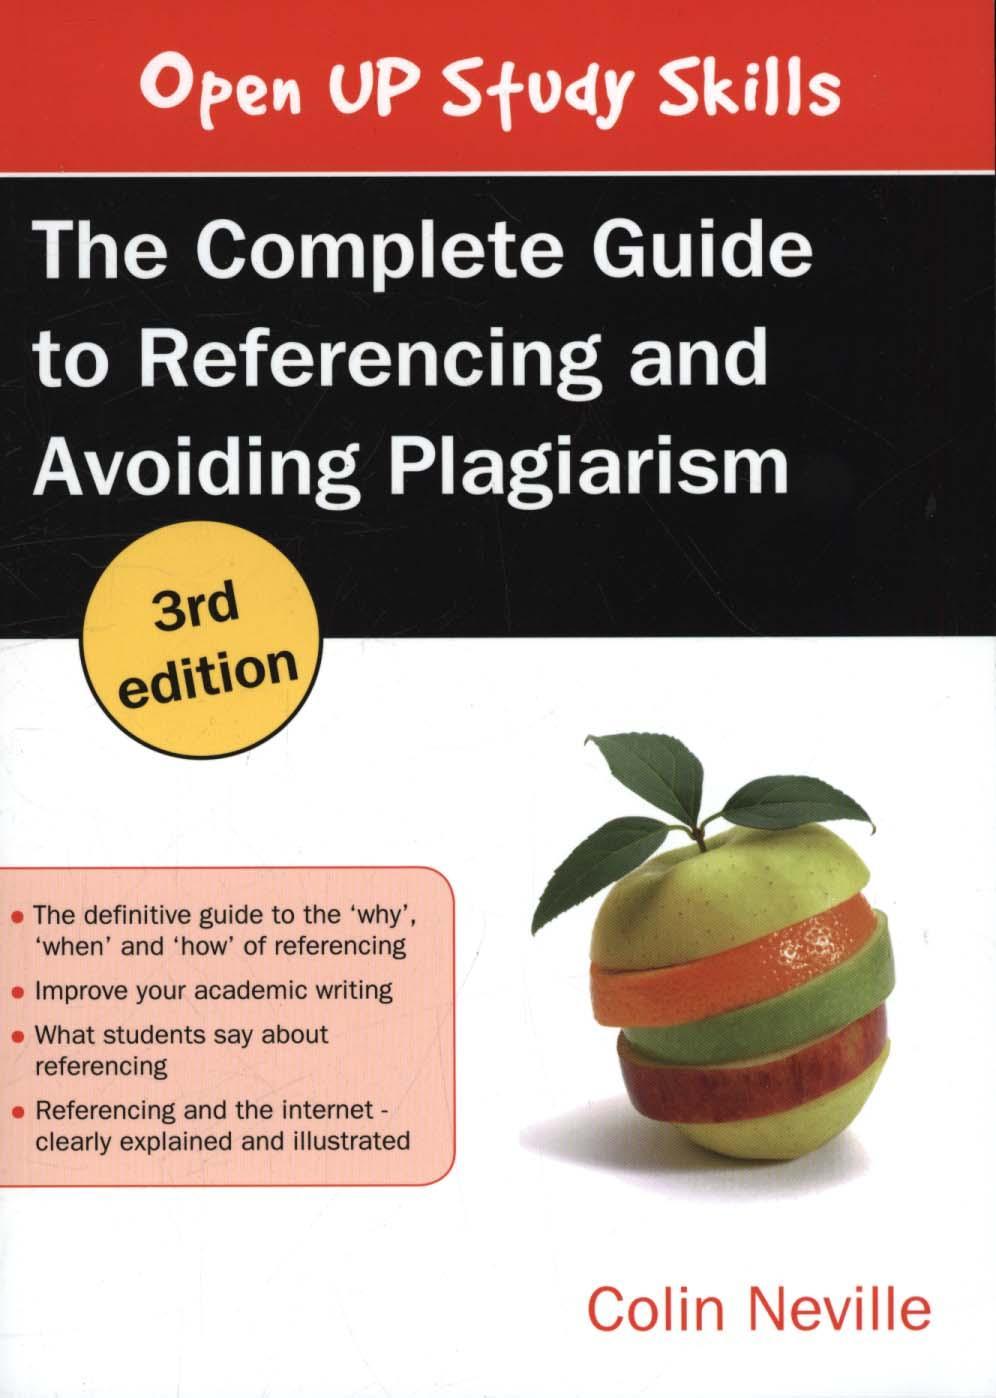 Complete Guide to Referencing and Avoiding Plagiarism - Colin Neville